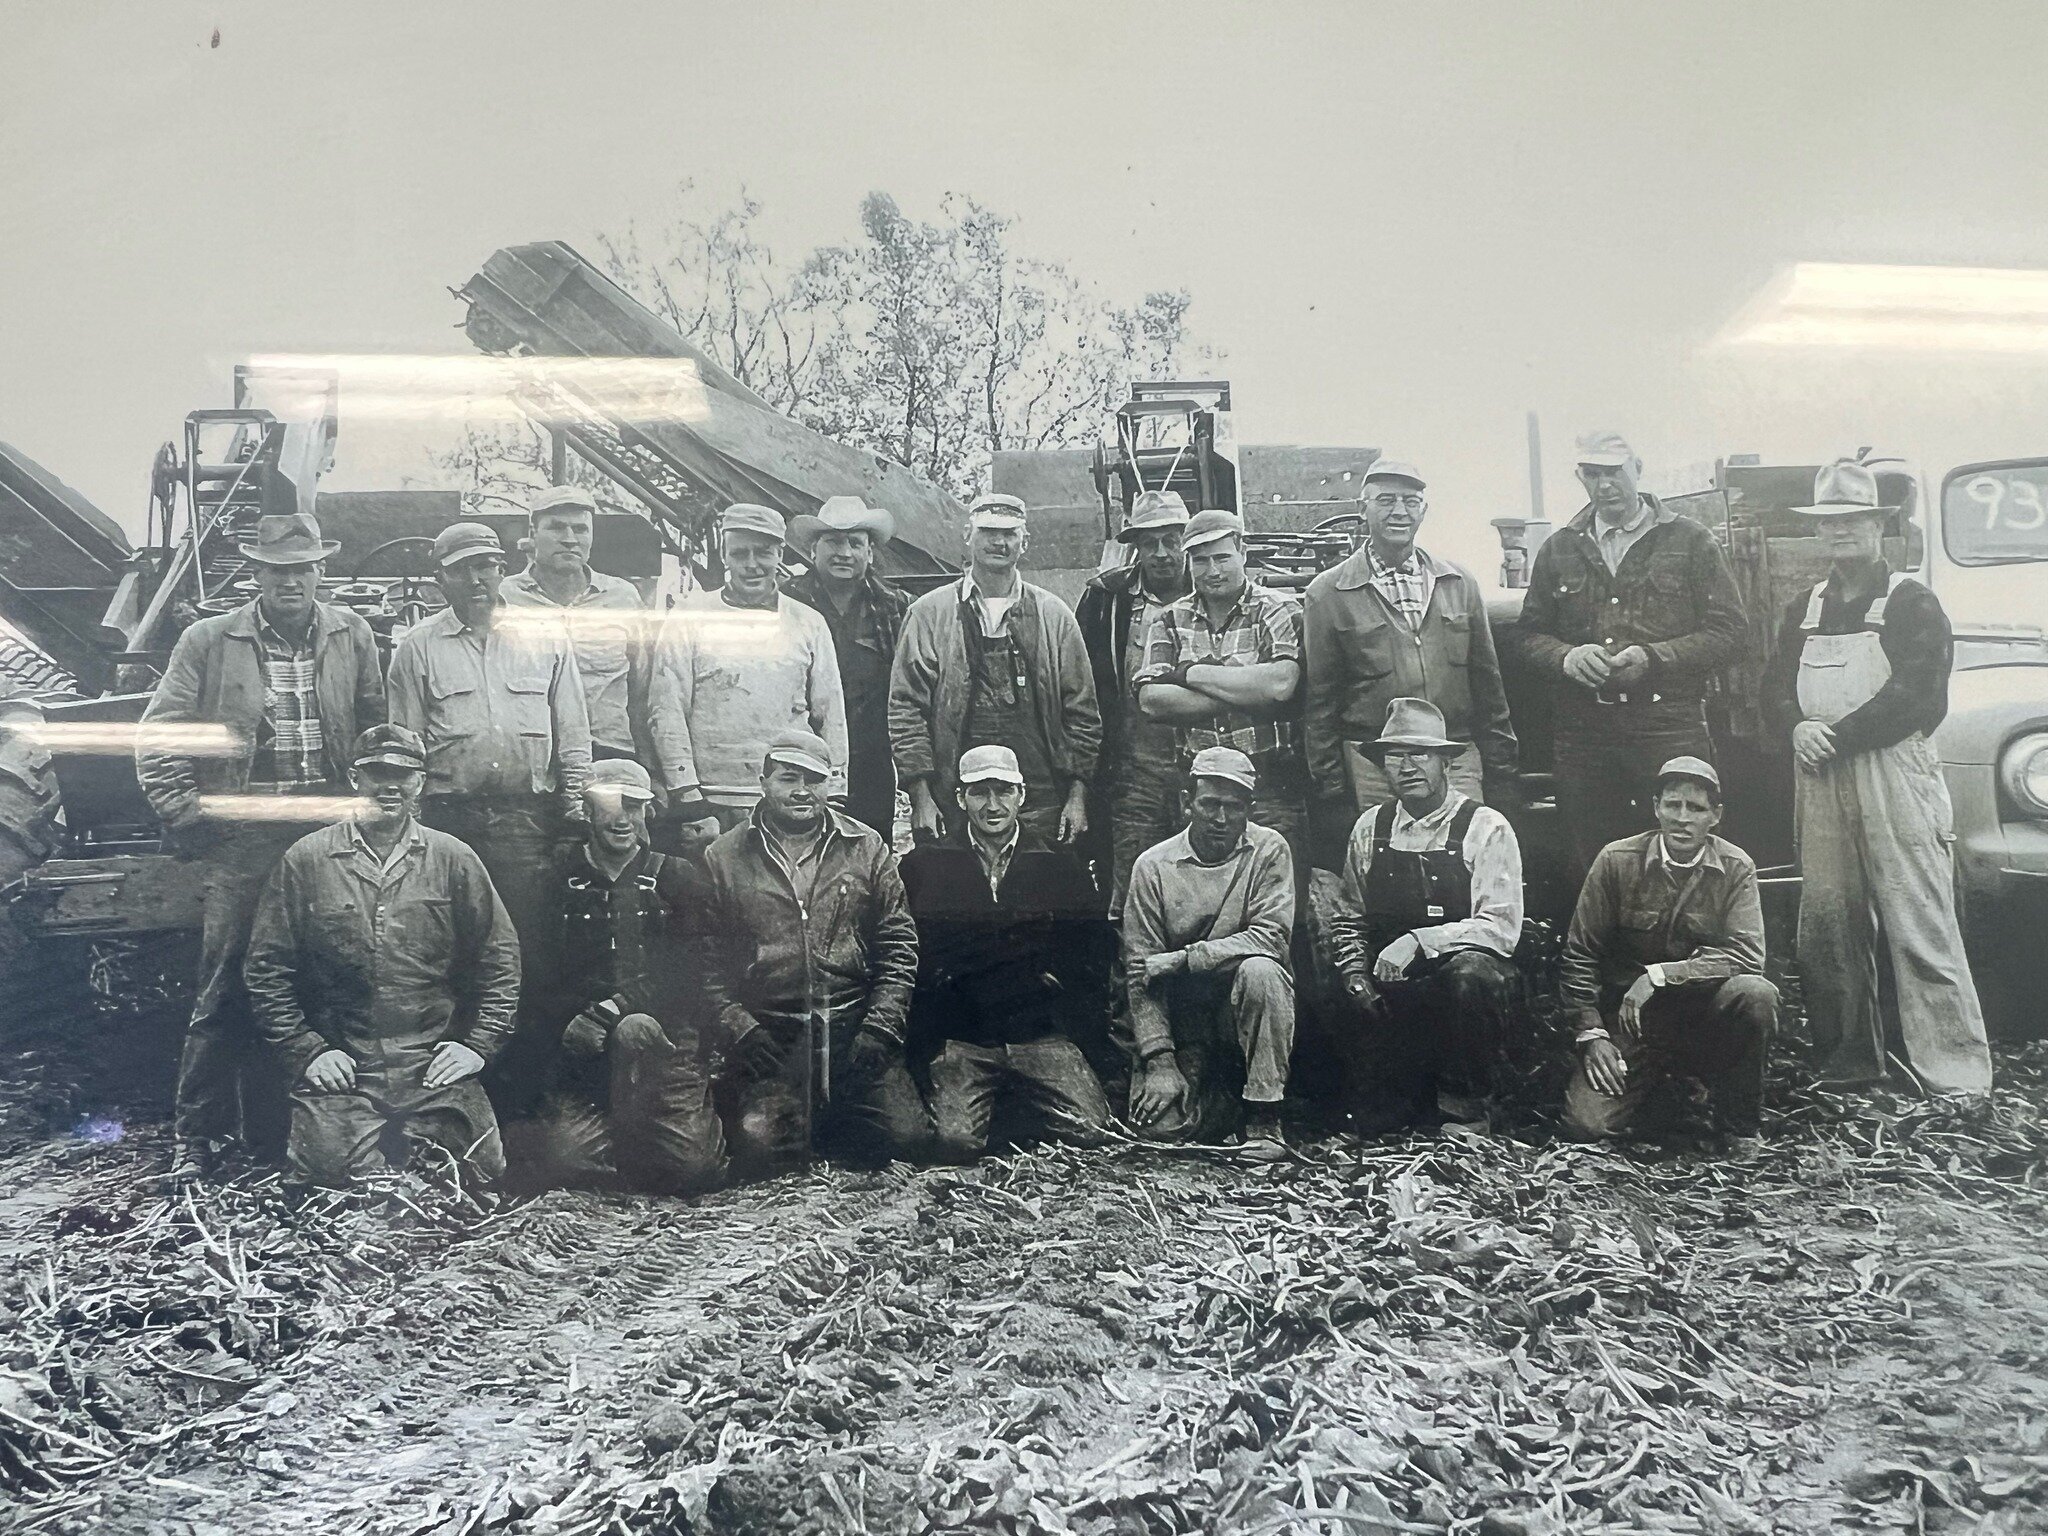 This photo was taken in 1958 -  My grandfather and his friends using the first sugar beet harvester in the Treasure Valley. I cherish the values, wisdom, and love for our community that both he and my grandmother passed down. 

@snakeriverbeet